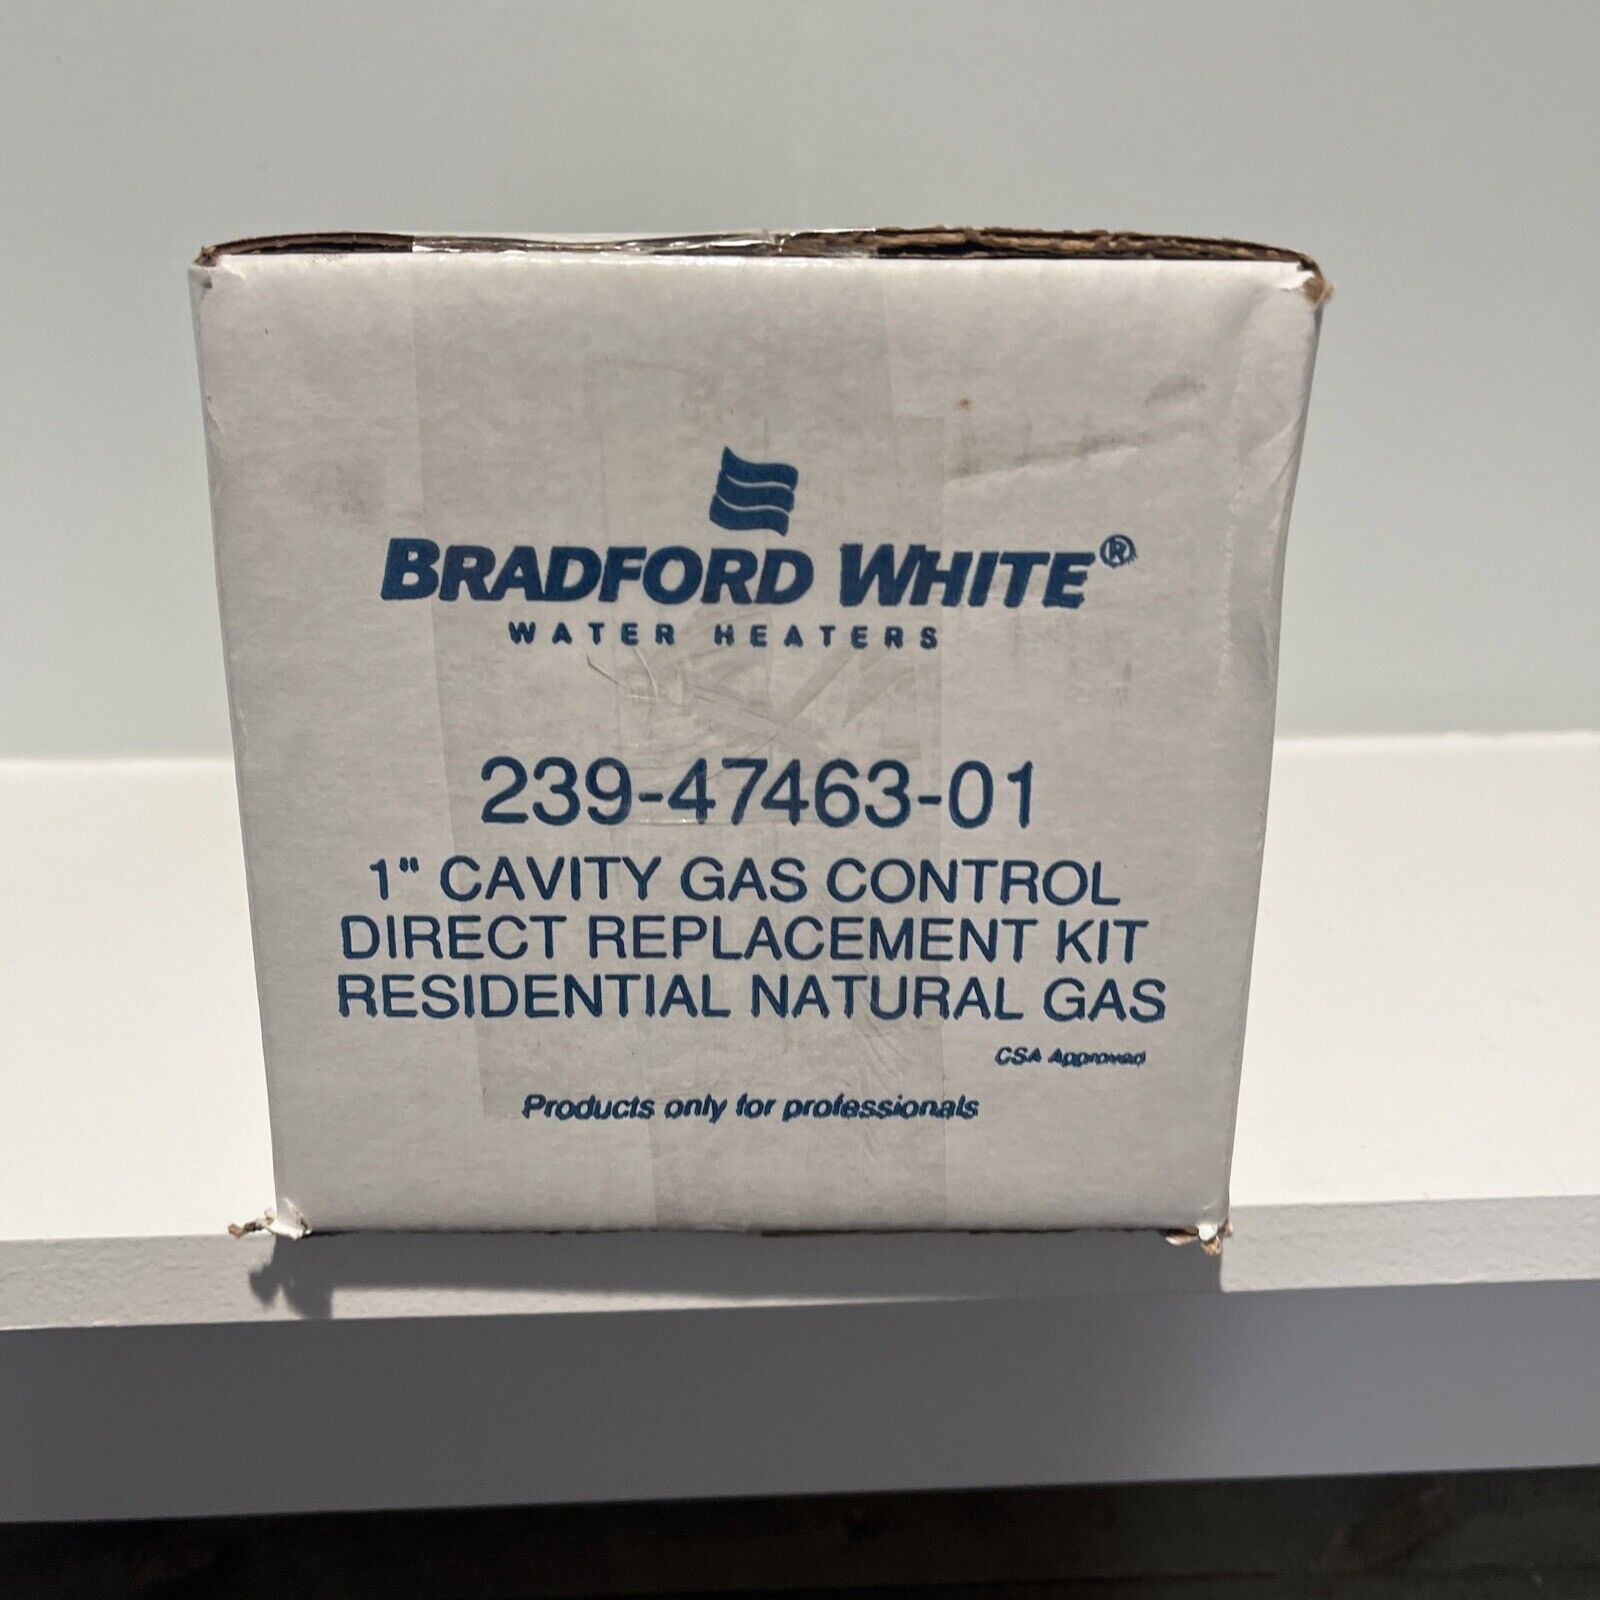 New 1” Bradford White 239-47463-01 Natural Gas Valve Replacement Kit Complete